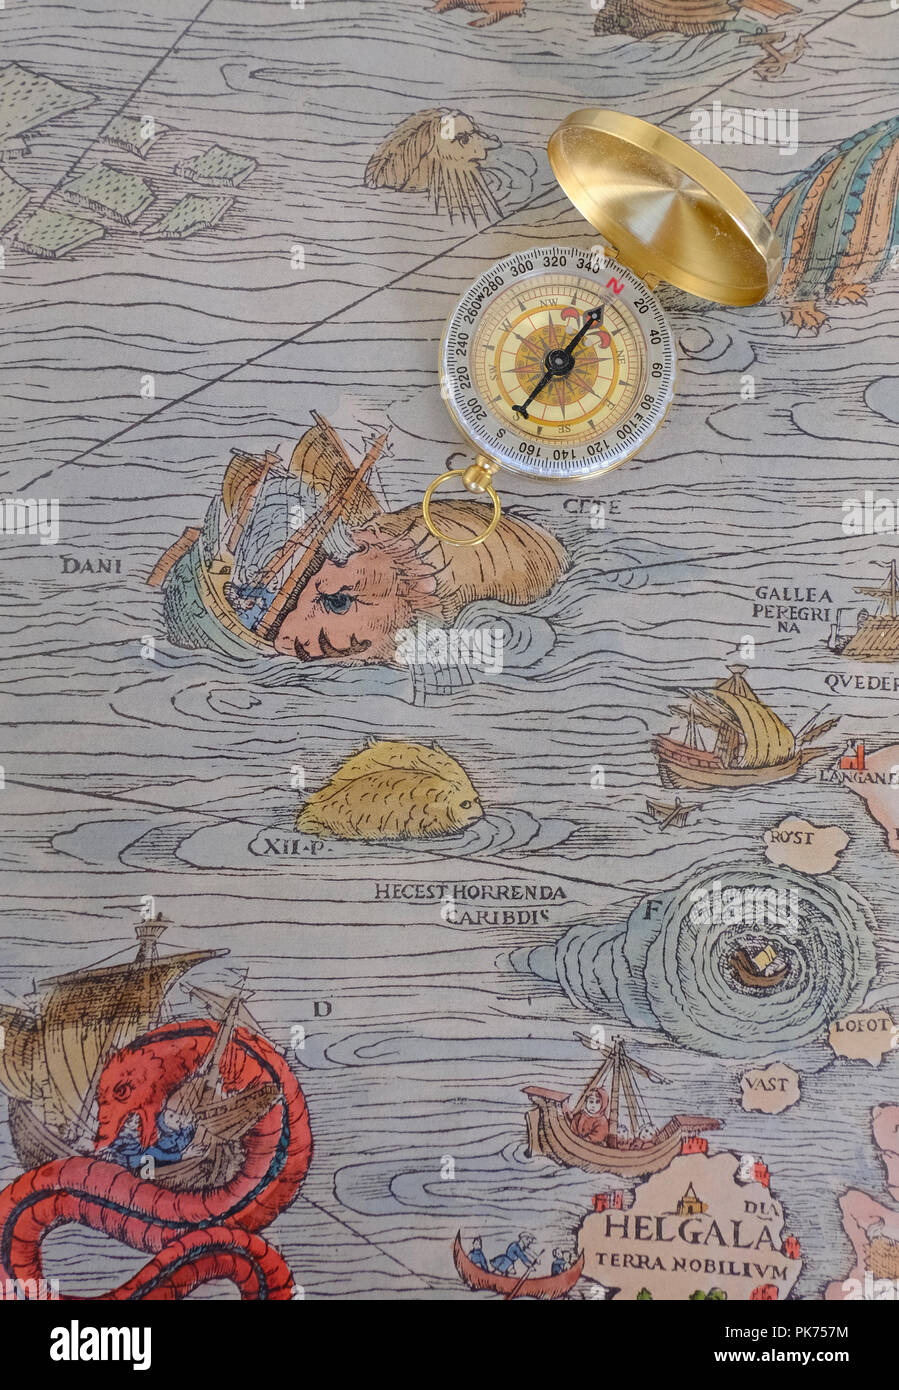 Compass placed on top of reproduction of section of Olaus Magnus's 16th century Marine Map featuring a Prister sinking a ship Stock Photo